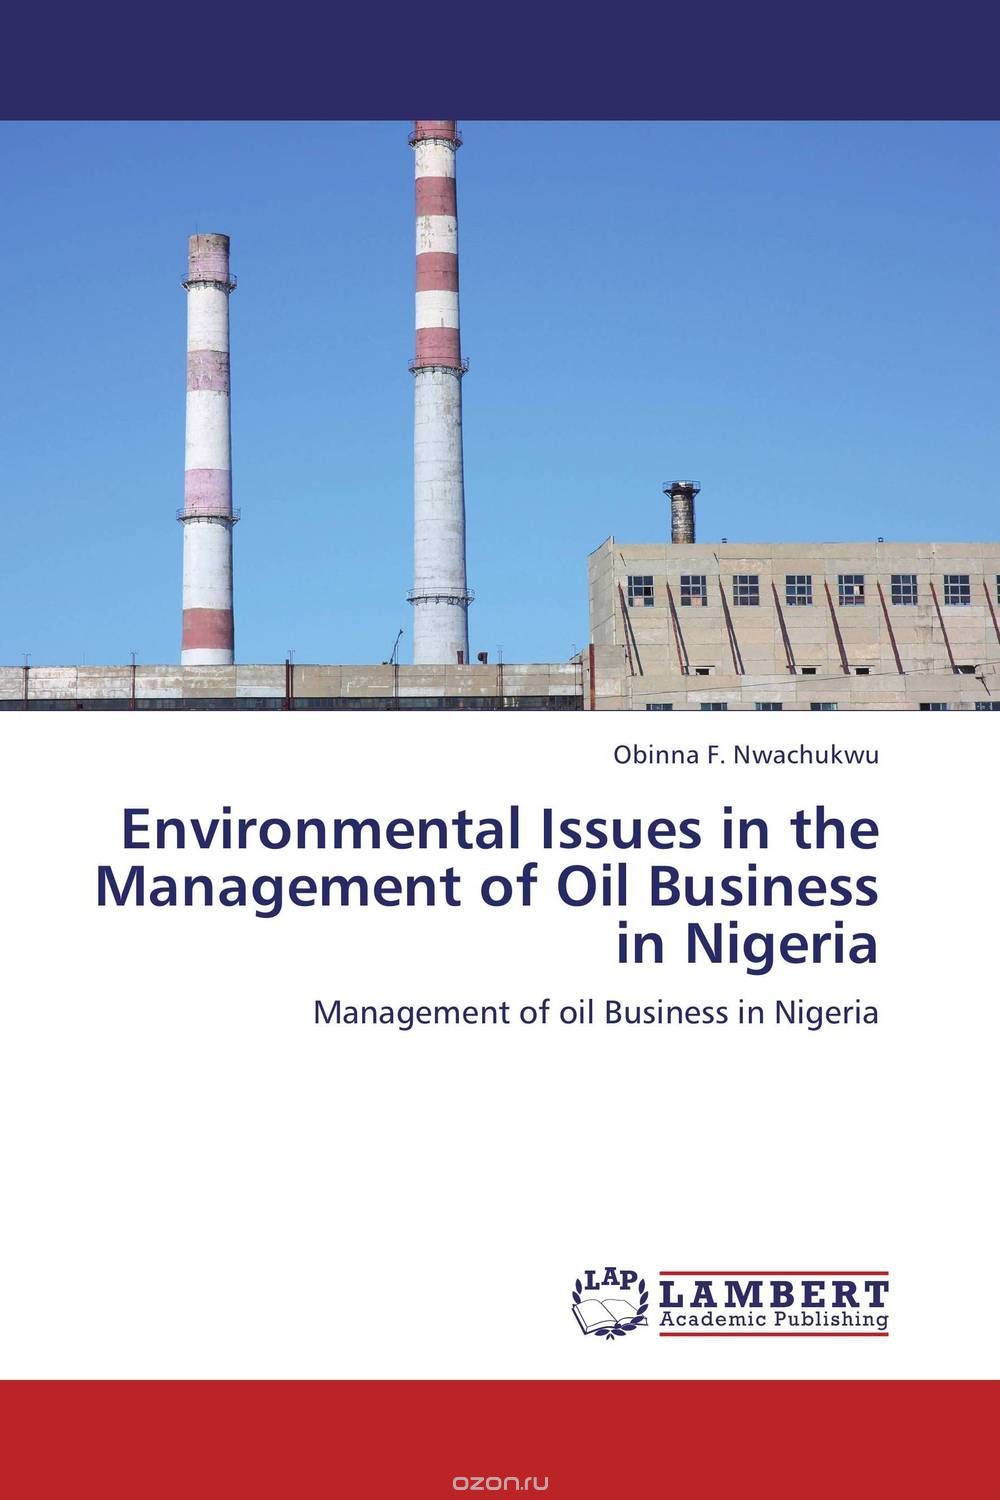 Скачать книгу "Environmental Issues in the Management of Oil Business in Nigeria"